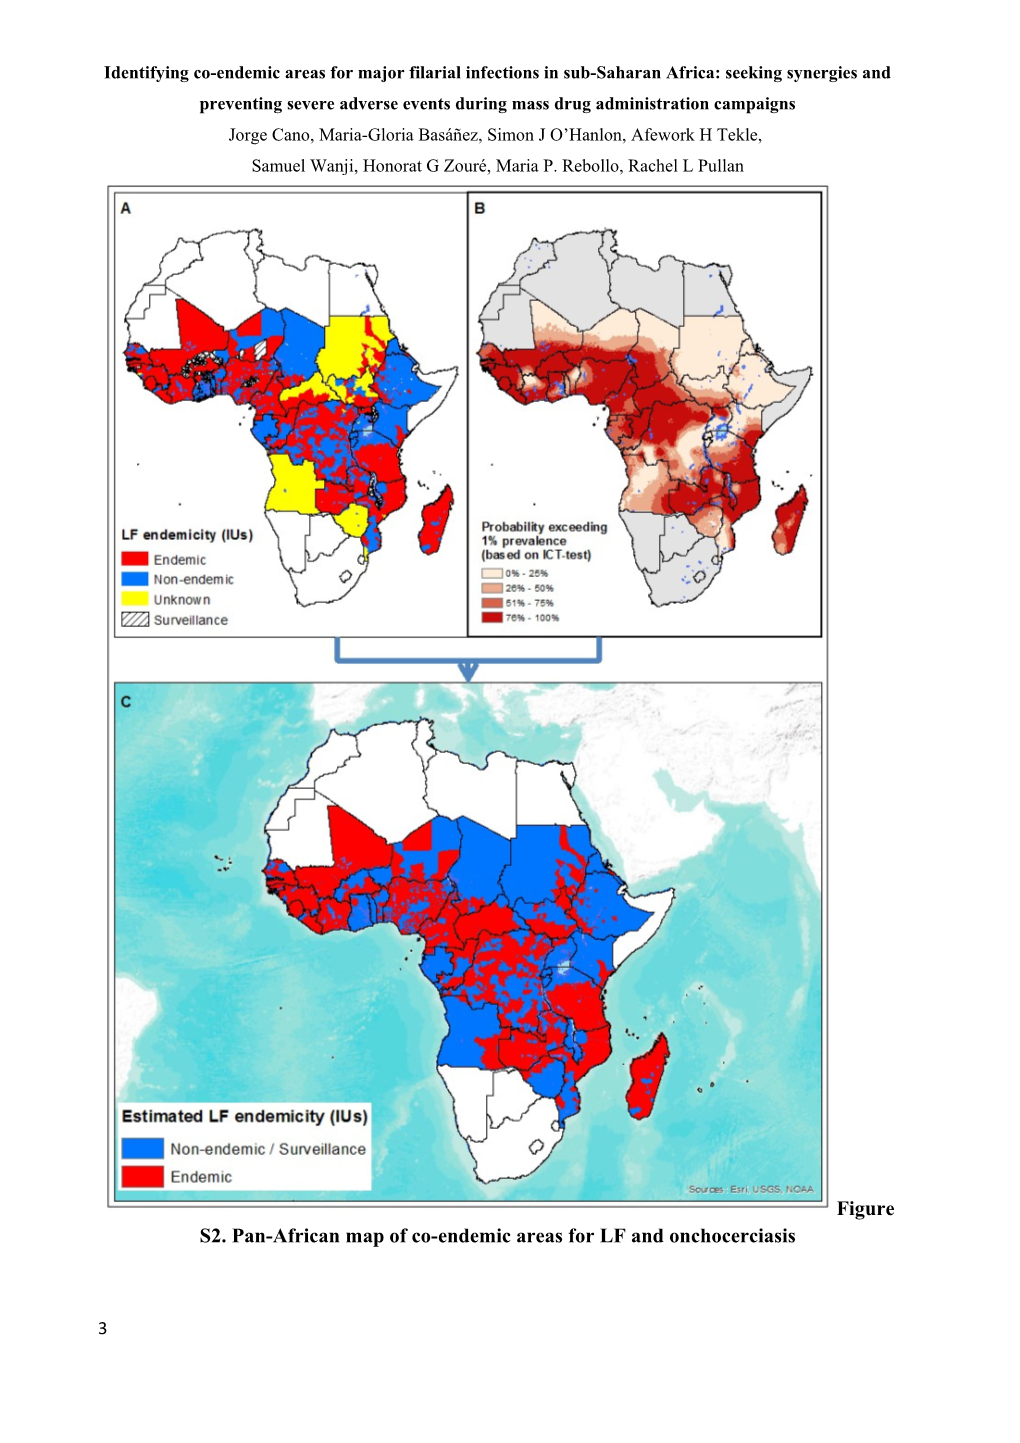 Identifying Co-Endemic Areas for Major Filarial Infections in Sub-Saharan Africa: Seeking